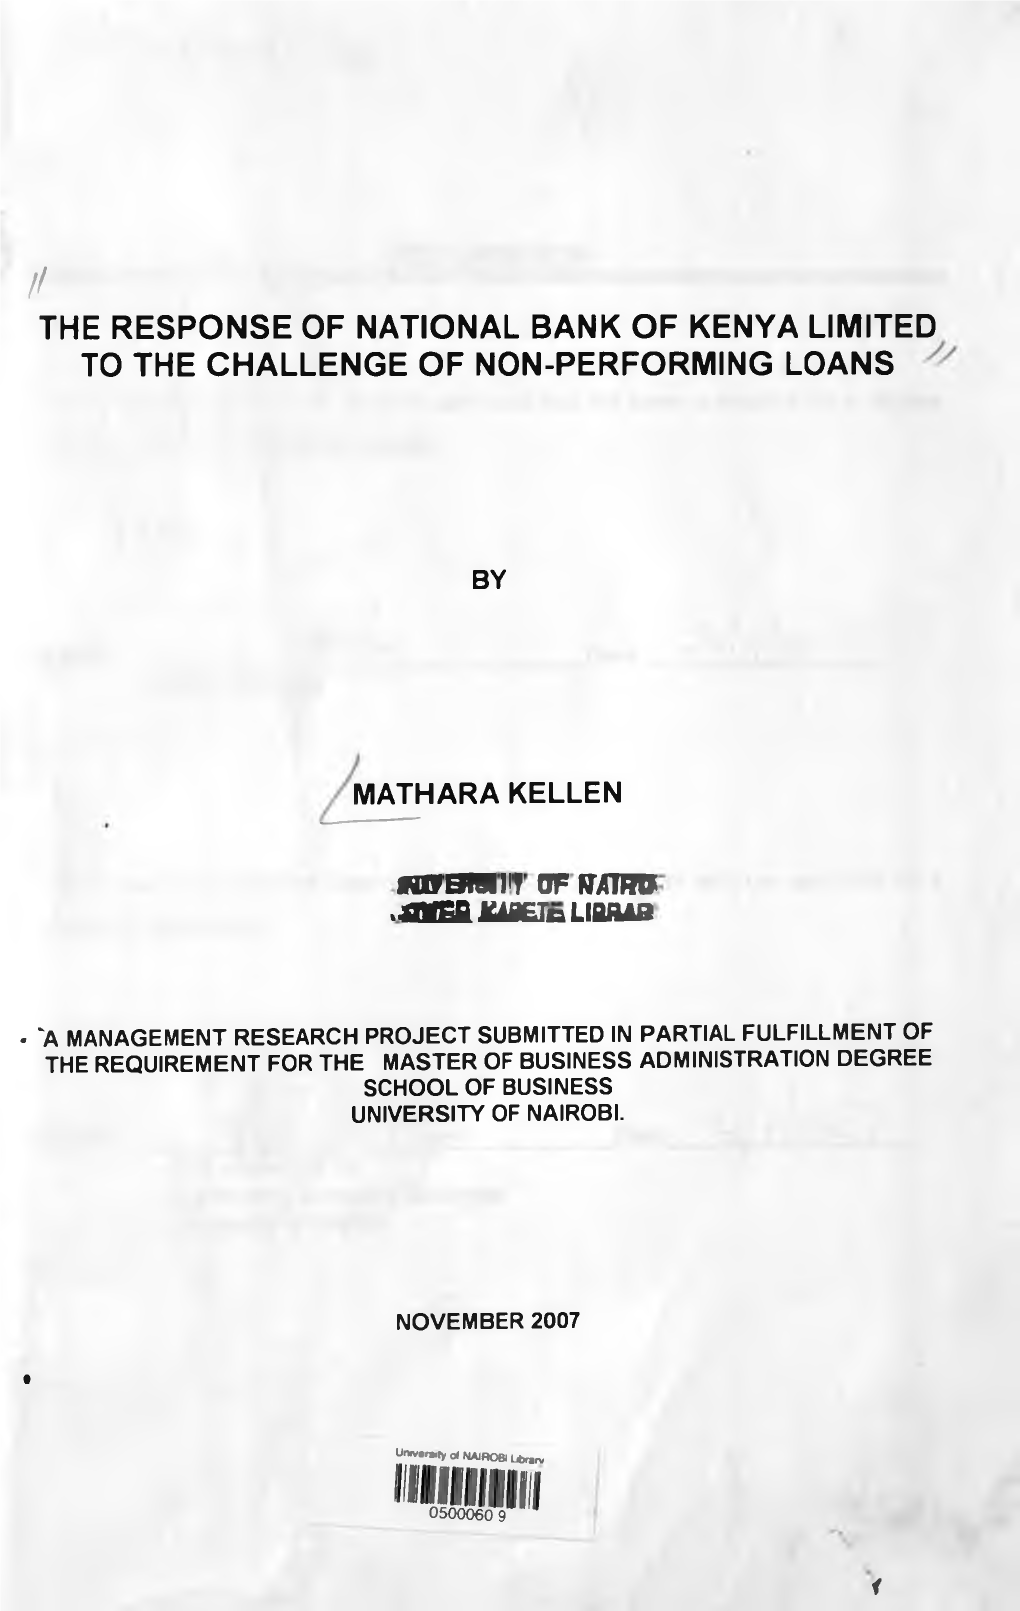 The Response of National Bank of Kenya Limited to the Challenge of Non-Performing Loans